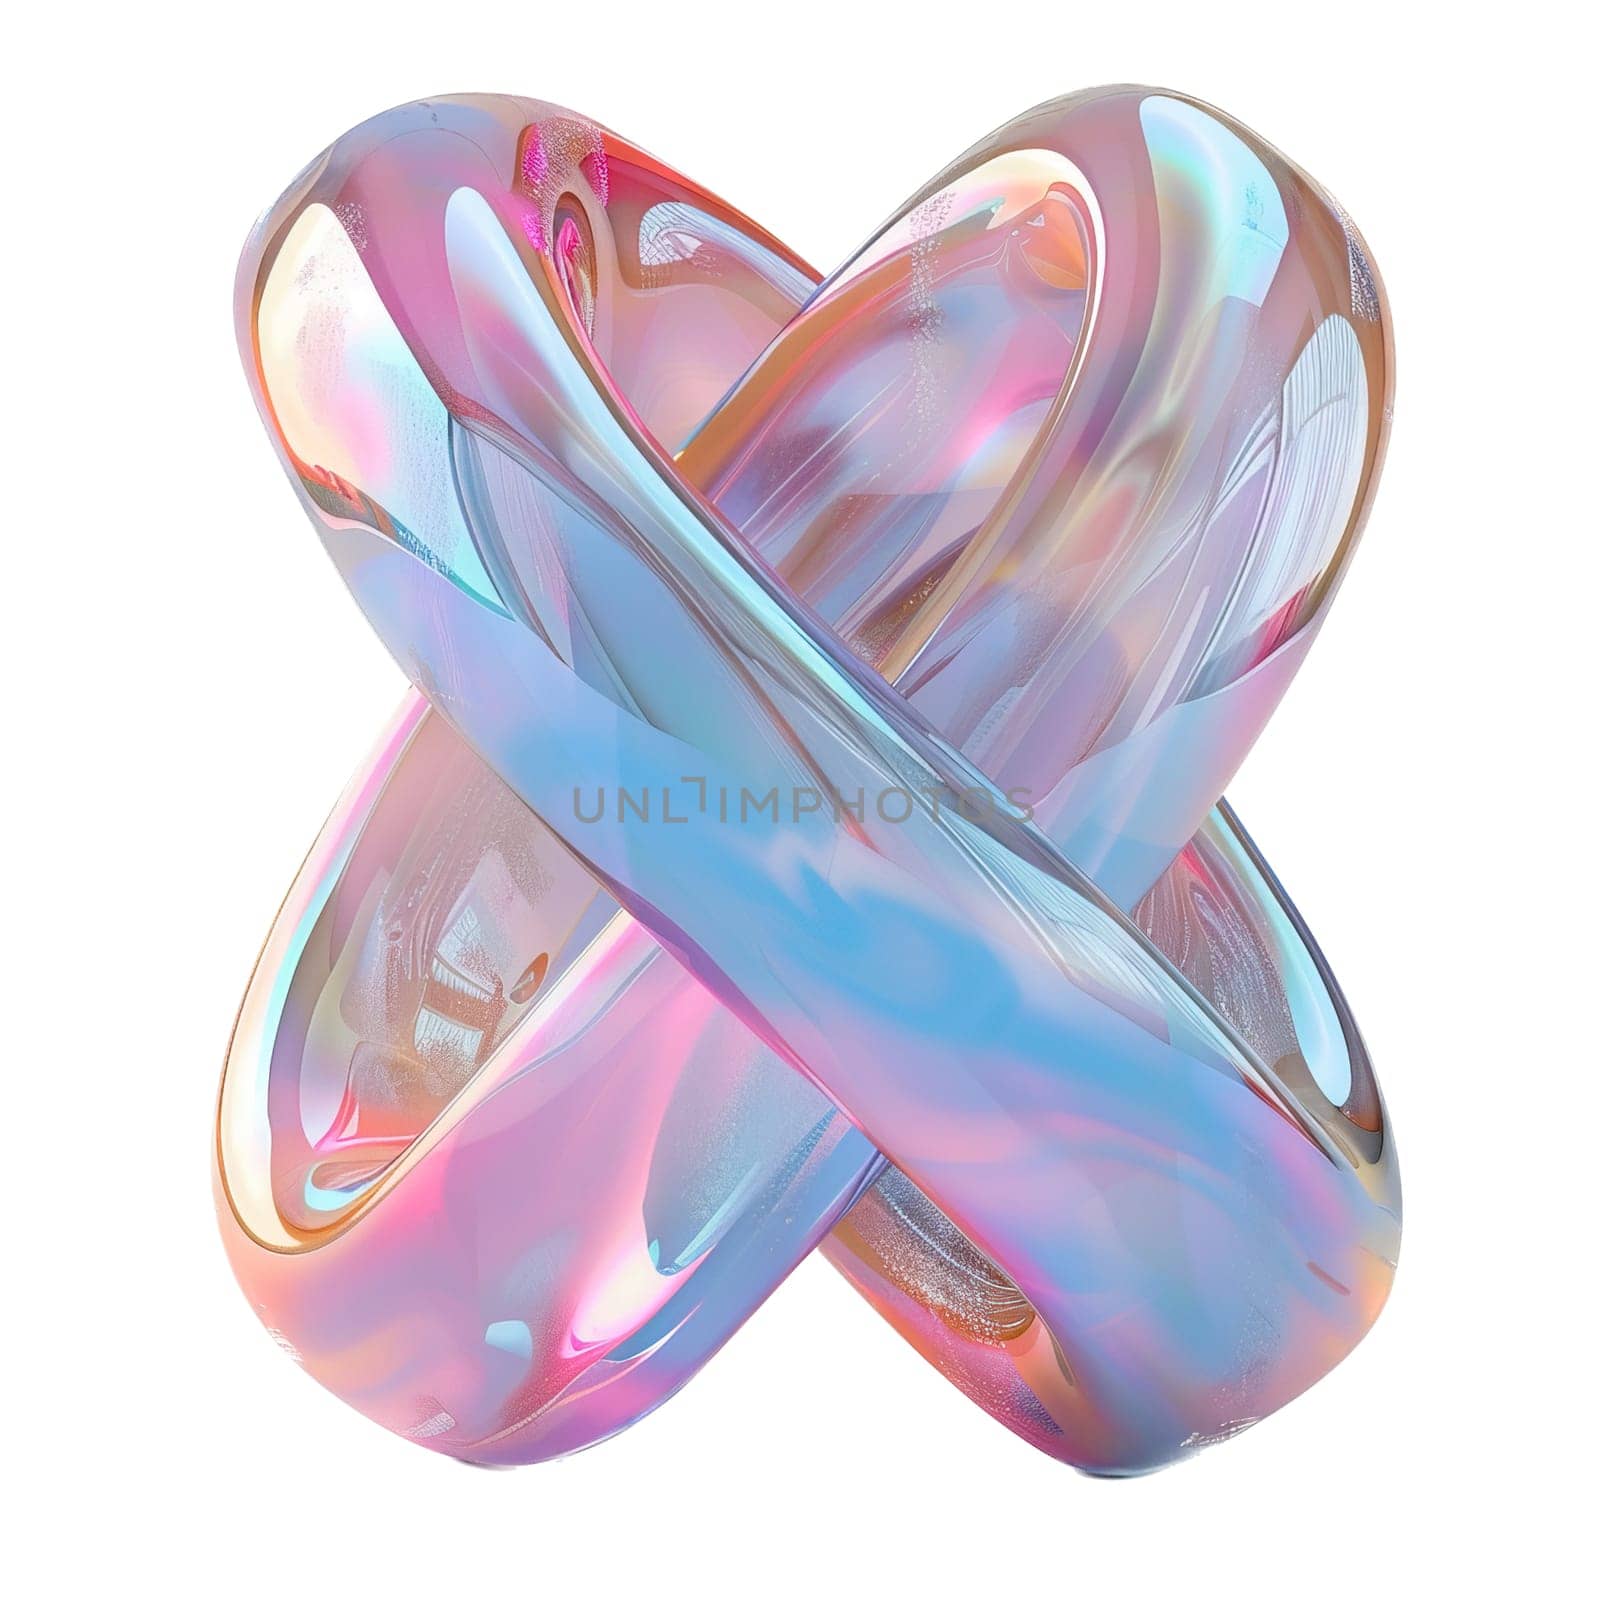 glassy pink and blue abstract figure for logo in the style of neumorphism, soft natural lighting simple and elegant space, close-up, super high detaill